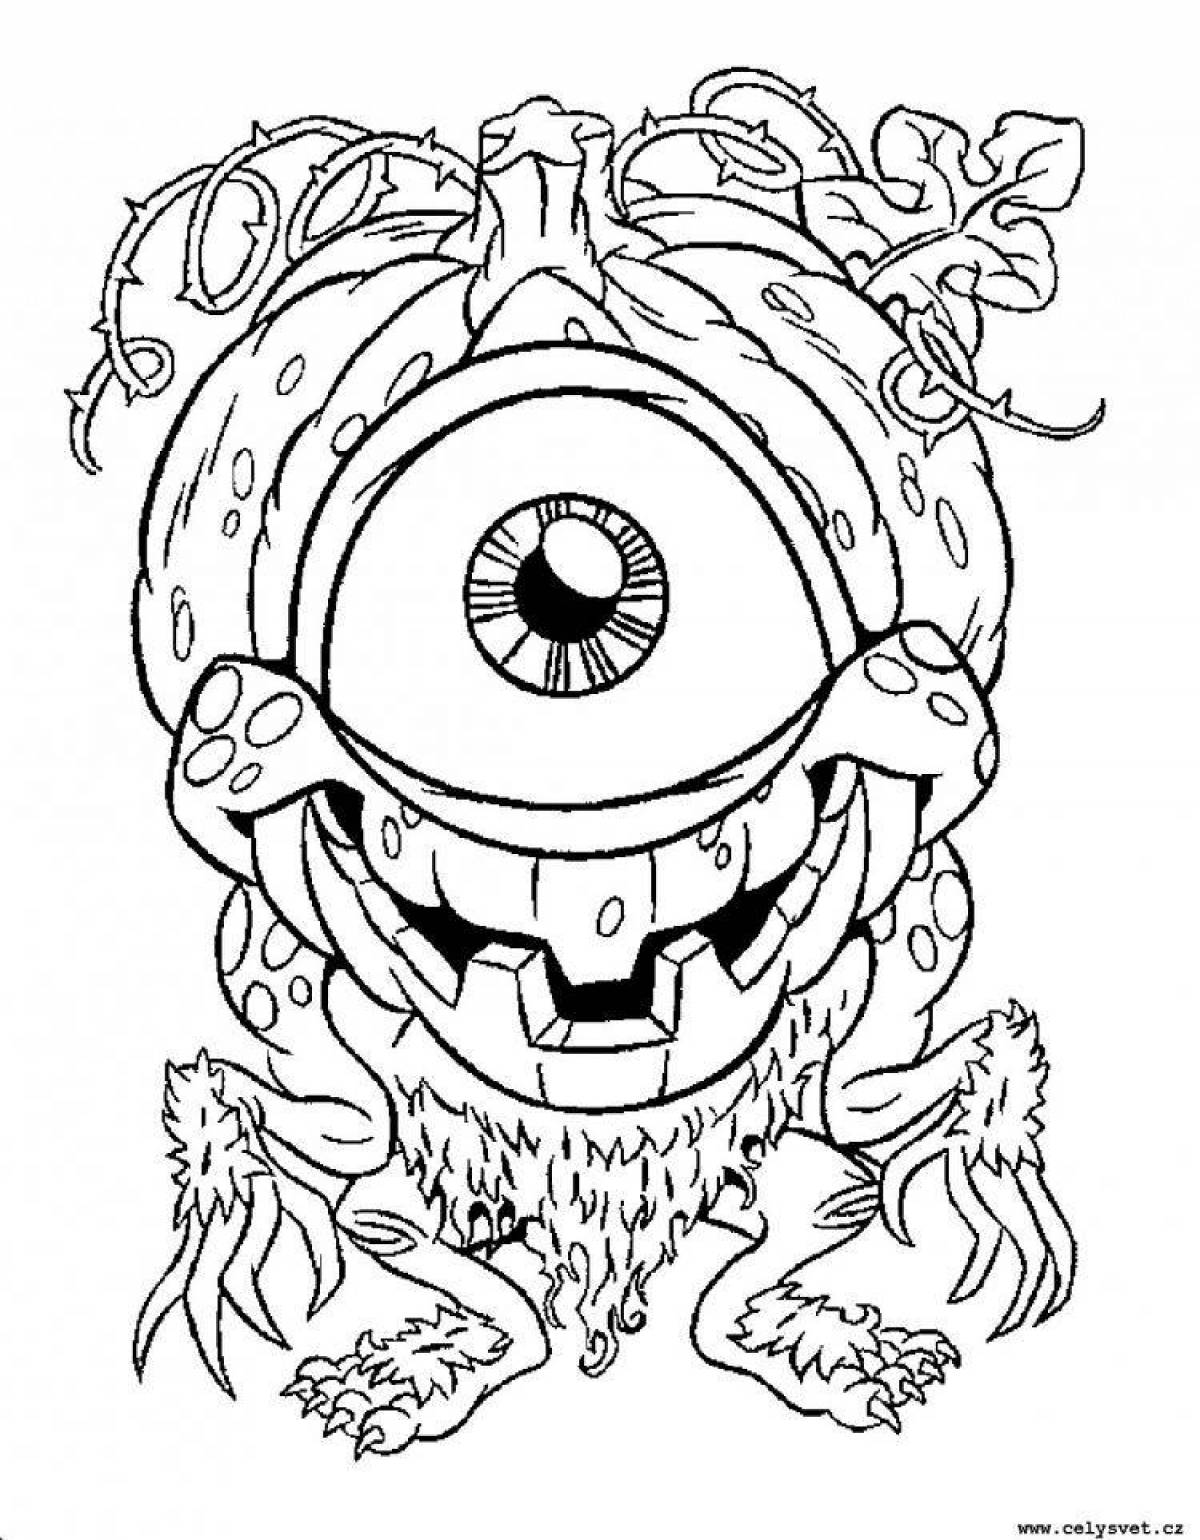 Crazy monster coloring pages for kids